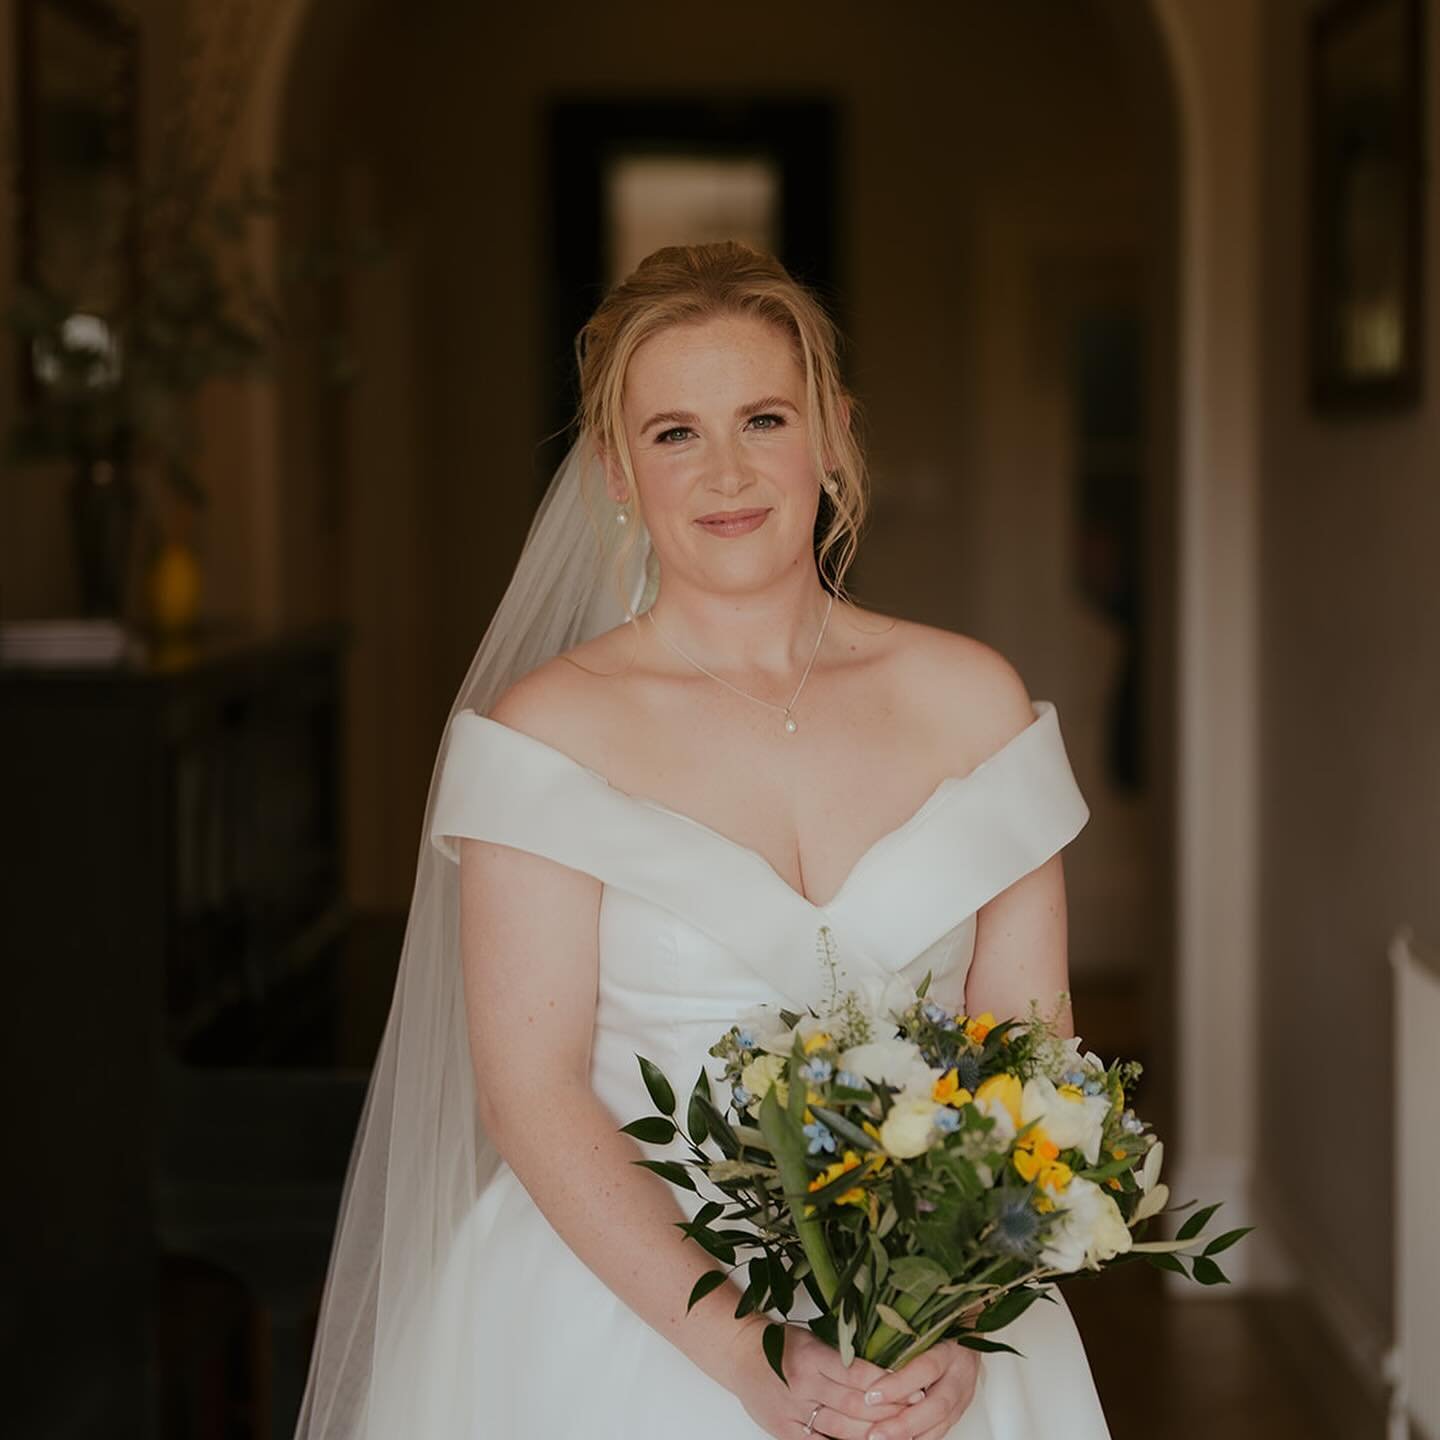 Stunning Bride @joannaevapeek who was married at @godwickweddings 
How beautiful are these images by @ginamanning_photography 
.
Joanna &amp; her bridesmaids all opted for natural makeup and looked so beautiful 🤍
Hair by @bohobeautybox 
.
.
.
.
#mak